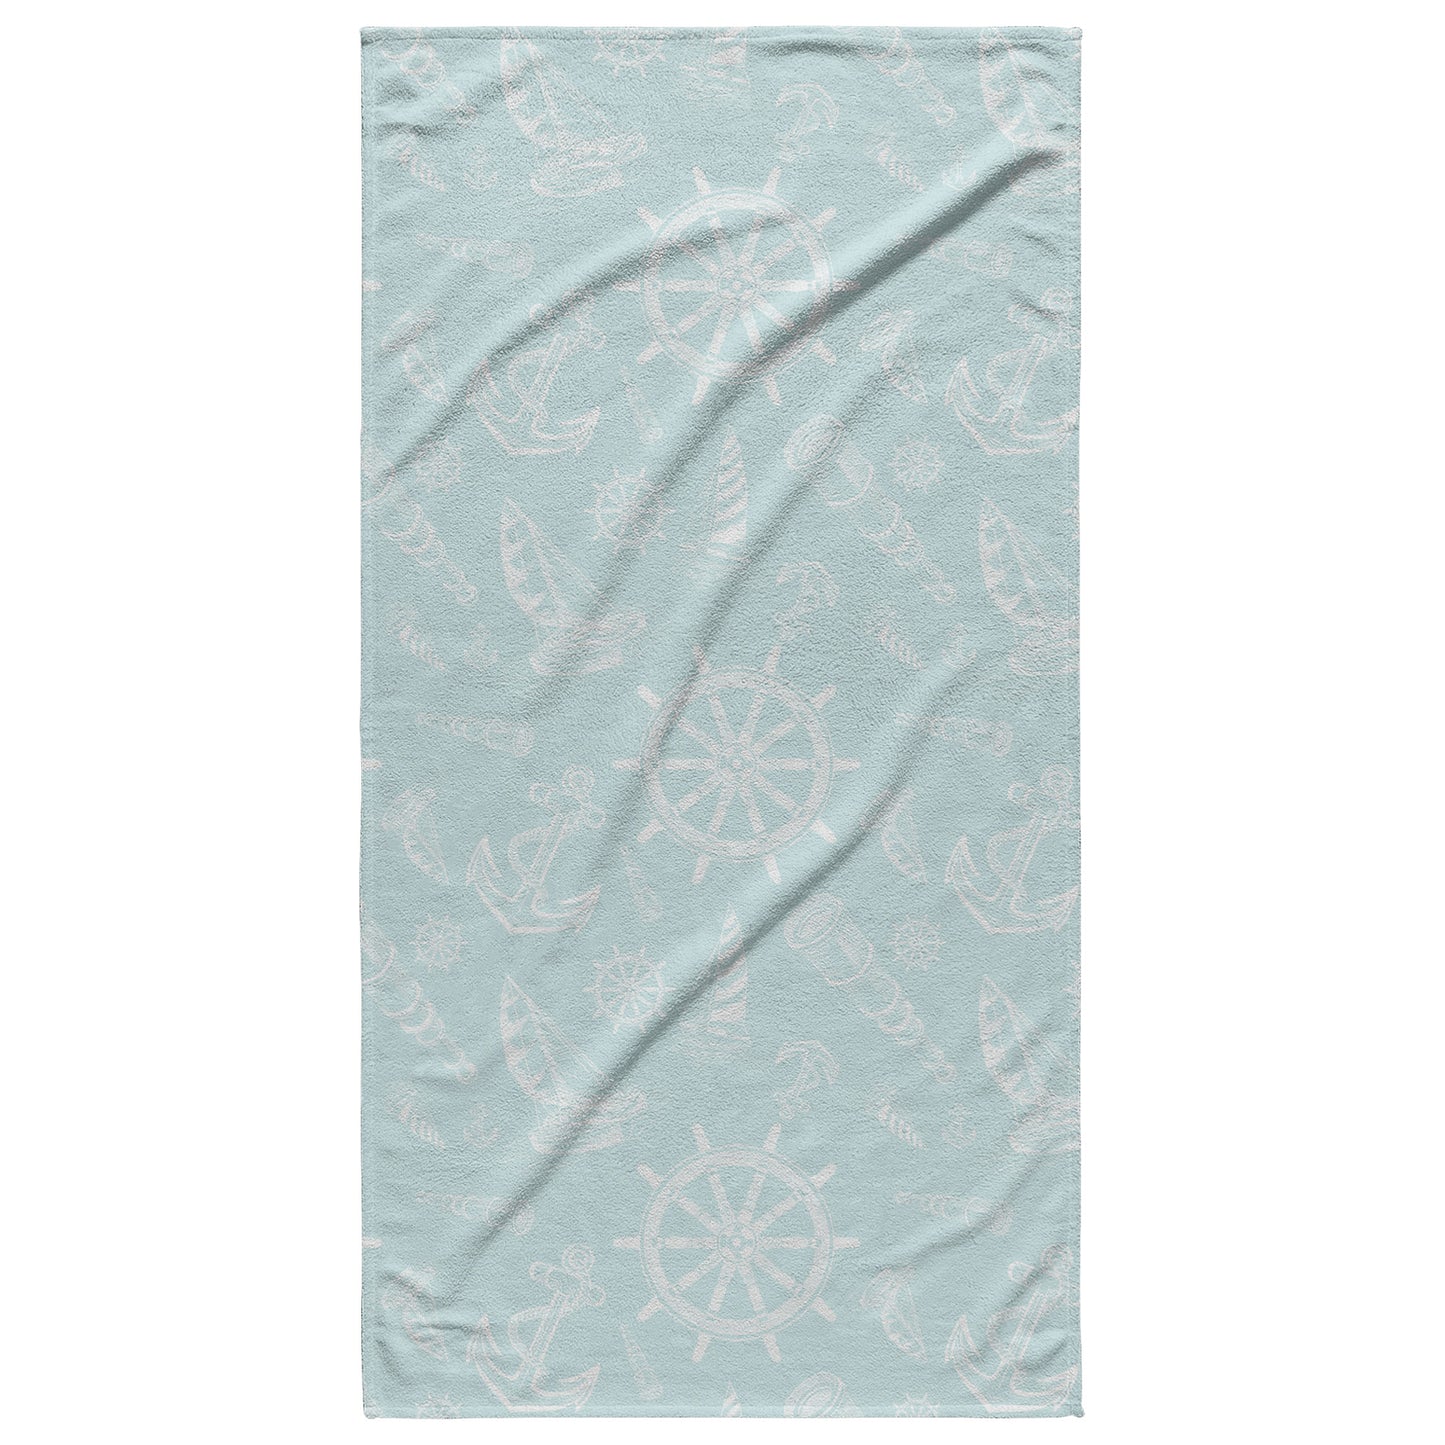 Nautical Sketches on Mist Background, Beach Towel